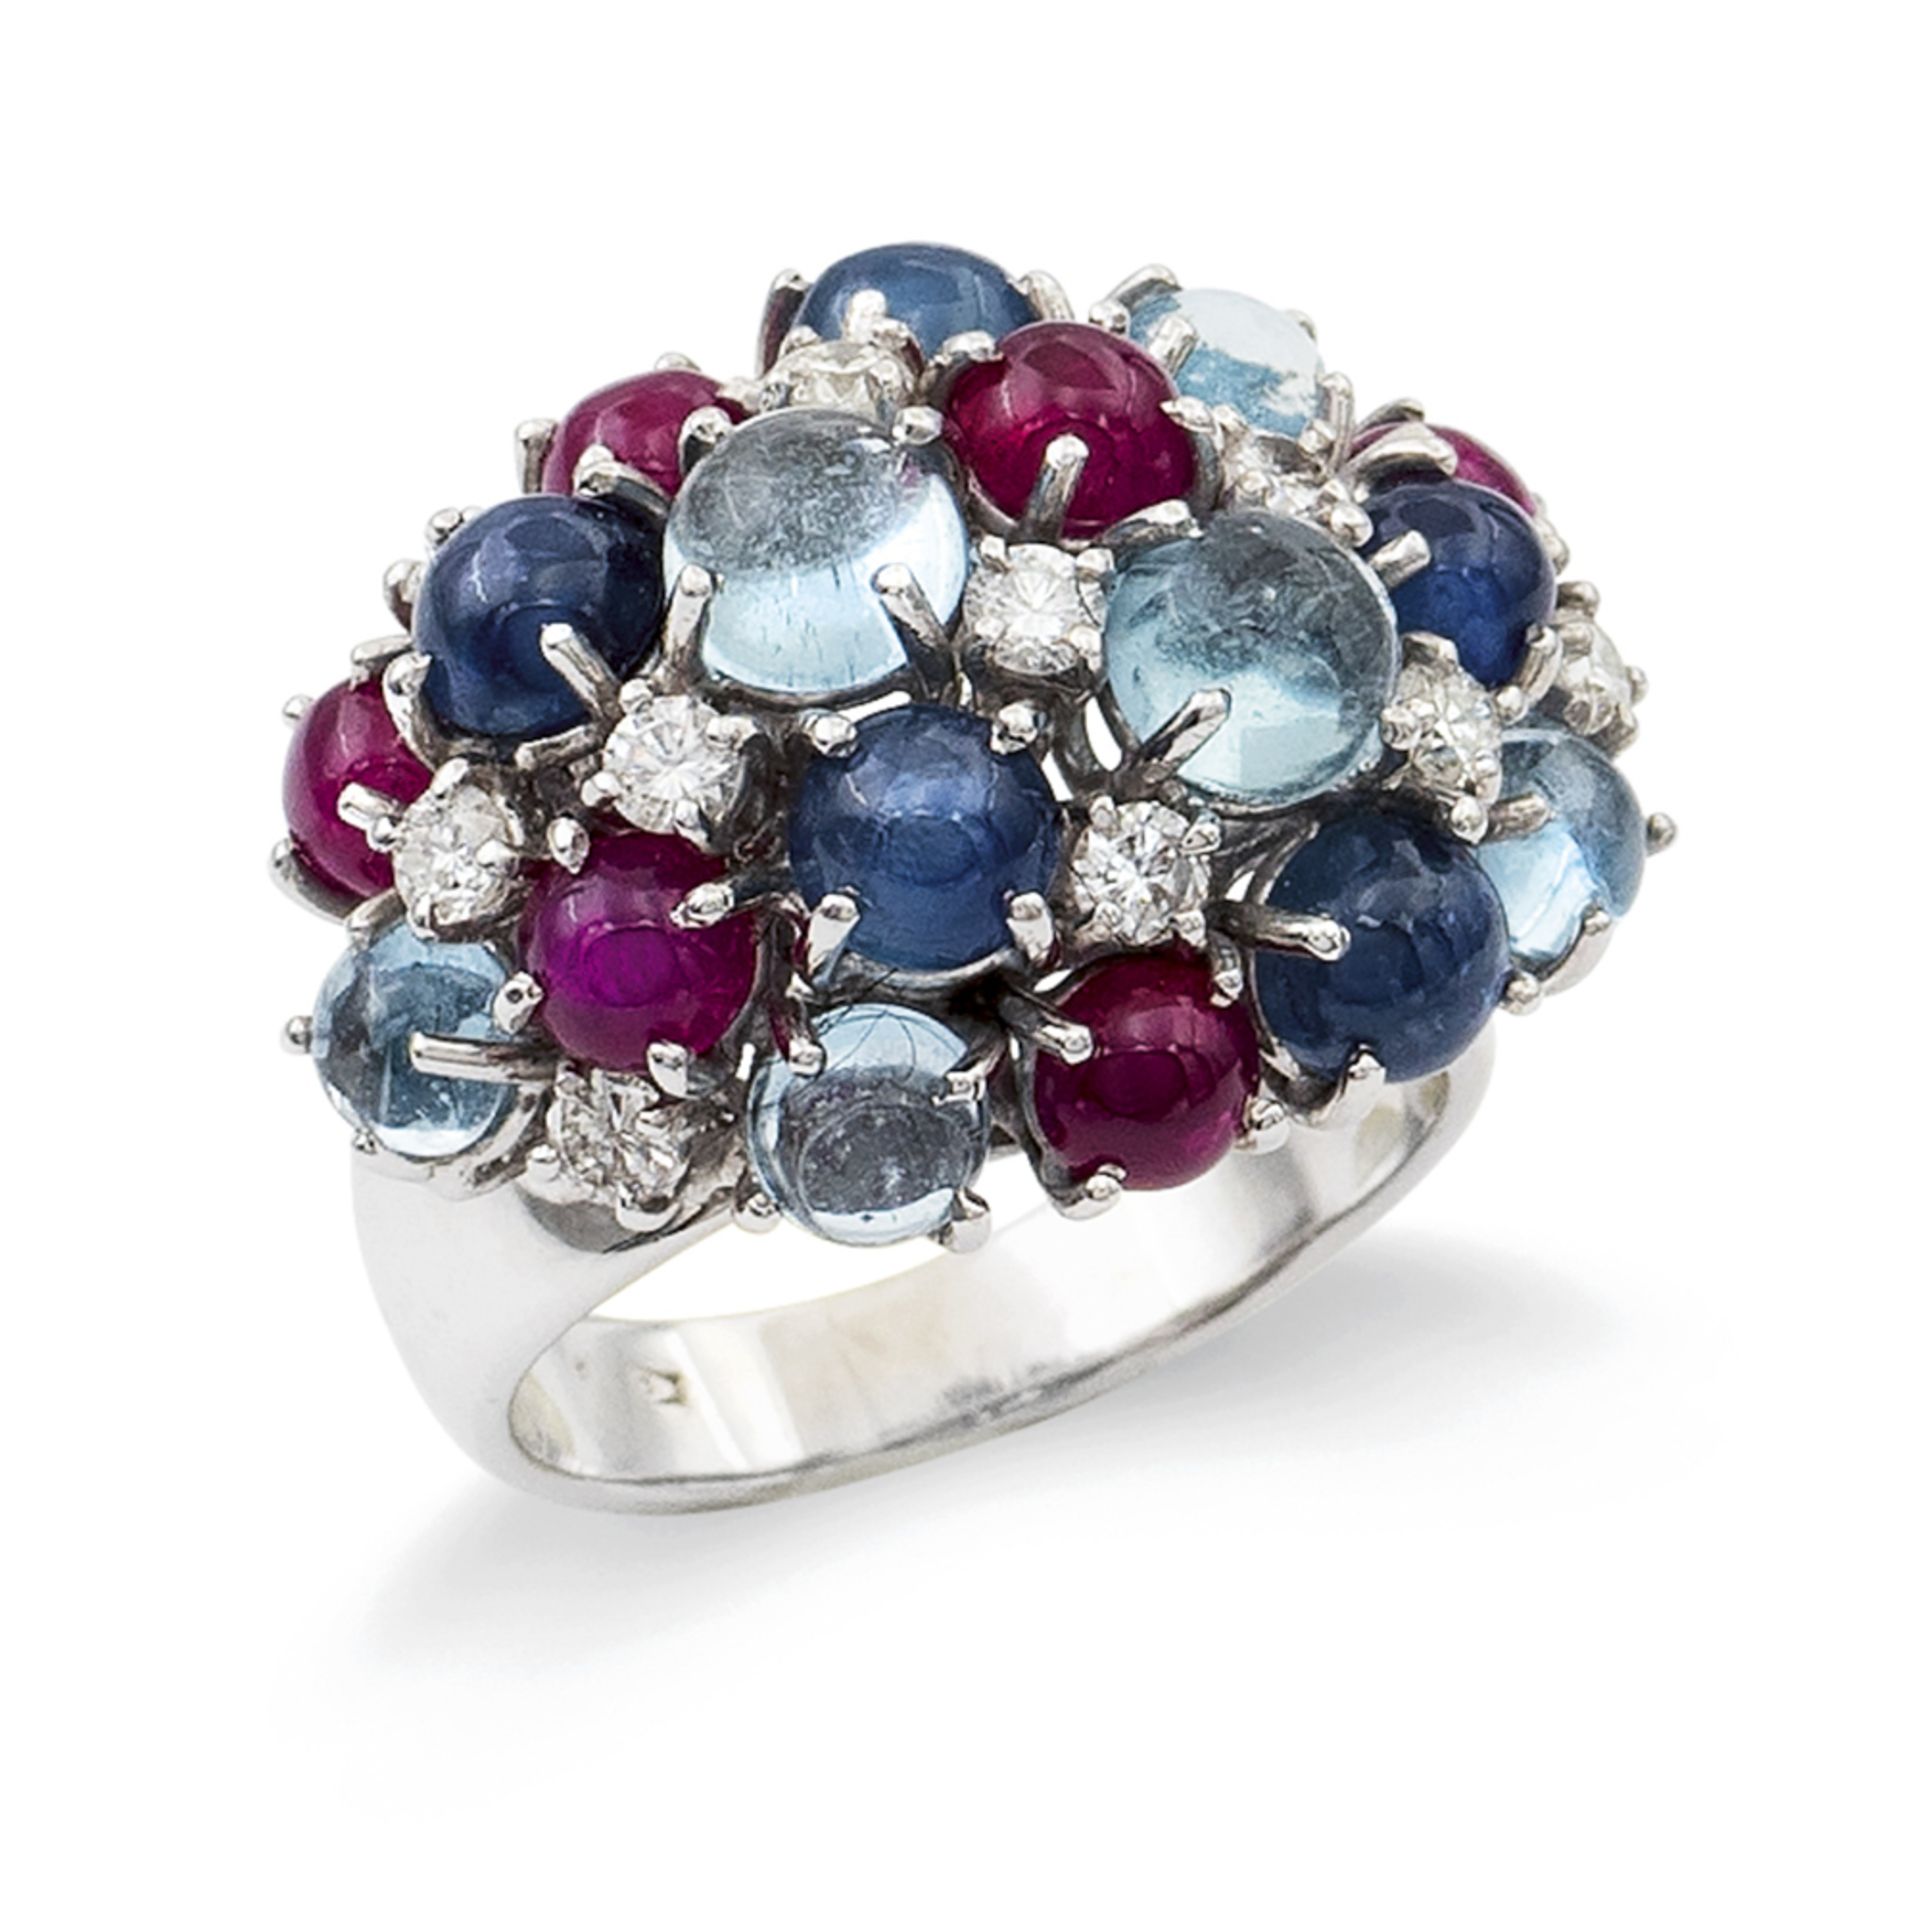 18kt white gold, rubies sapphires and aquamarines ring weigth 12 gr.